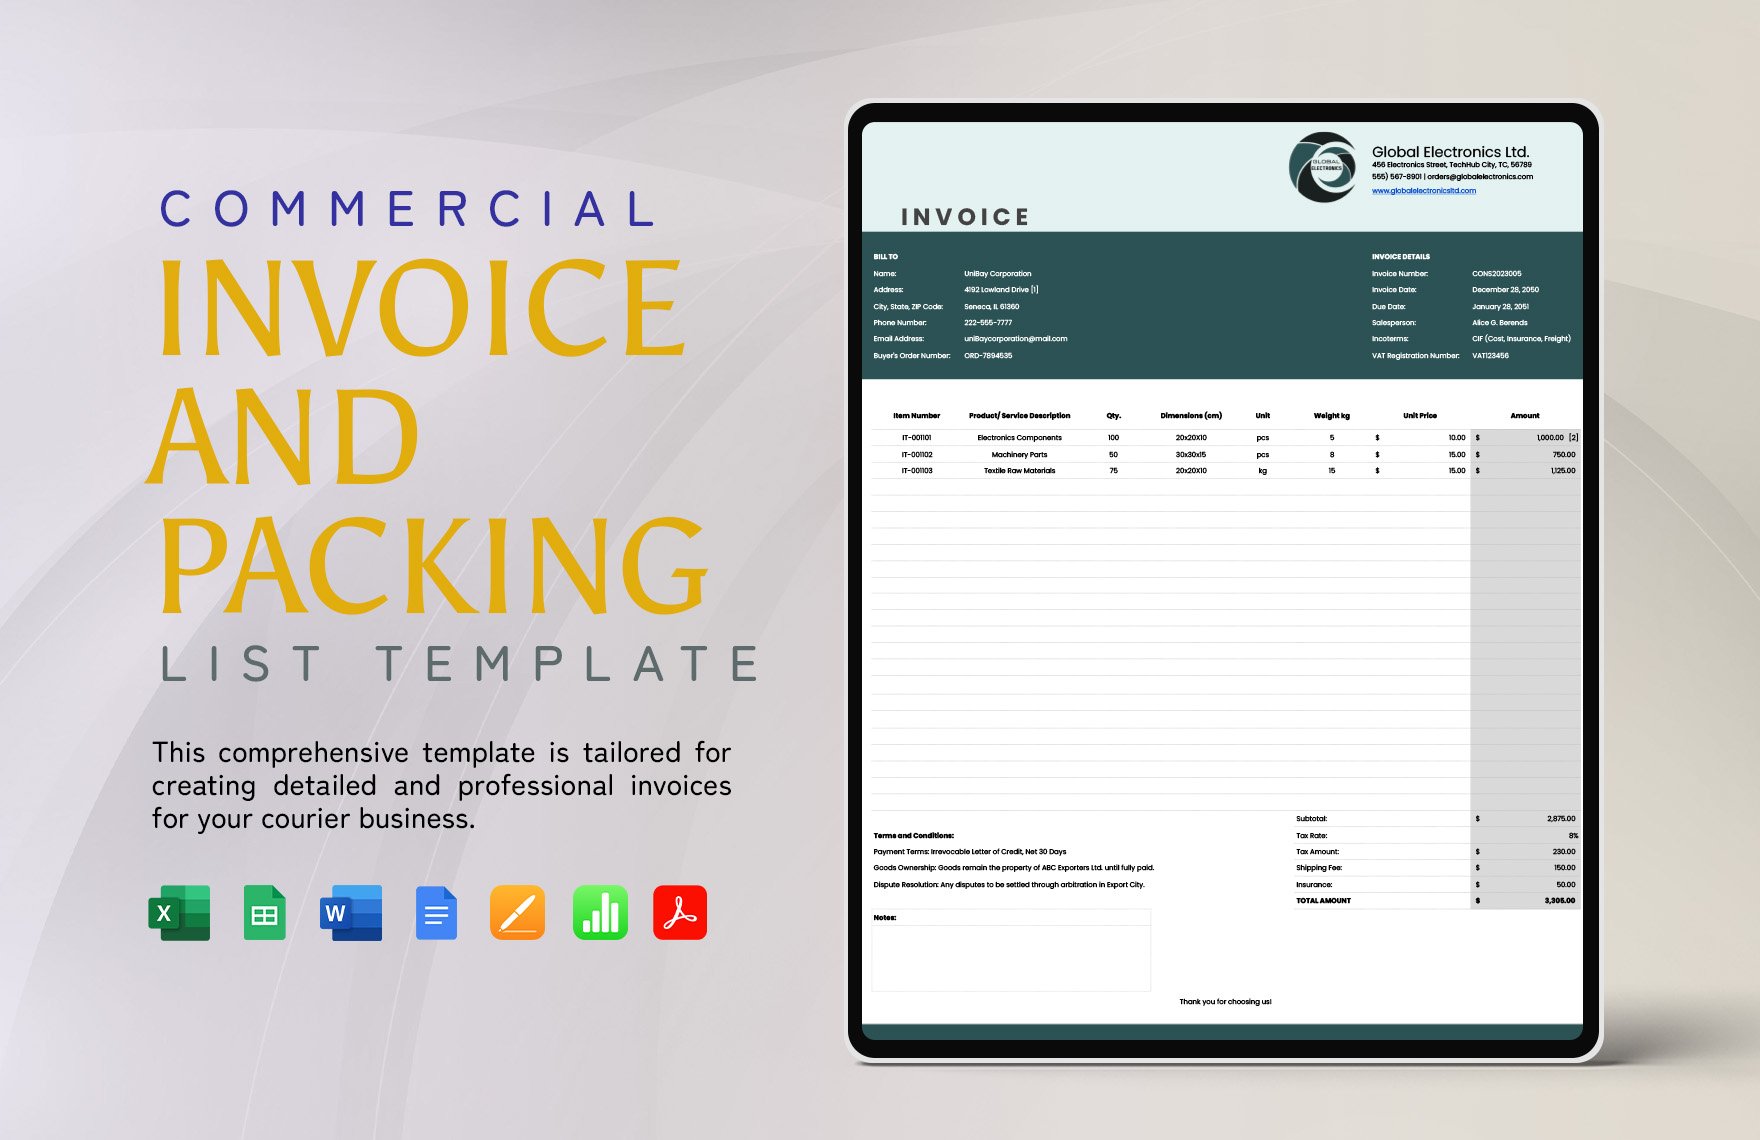 Commercial Invoice and Packing List Template